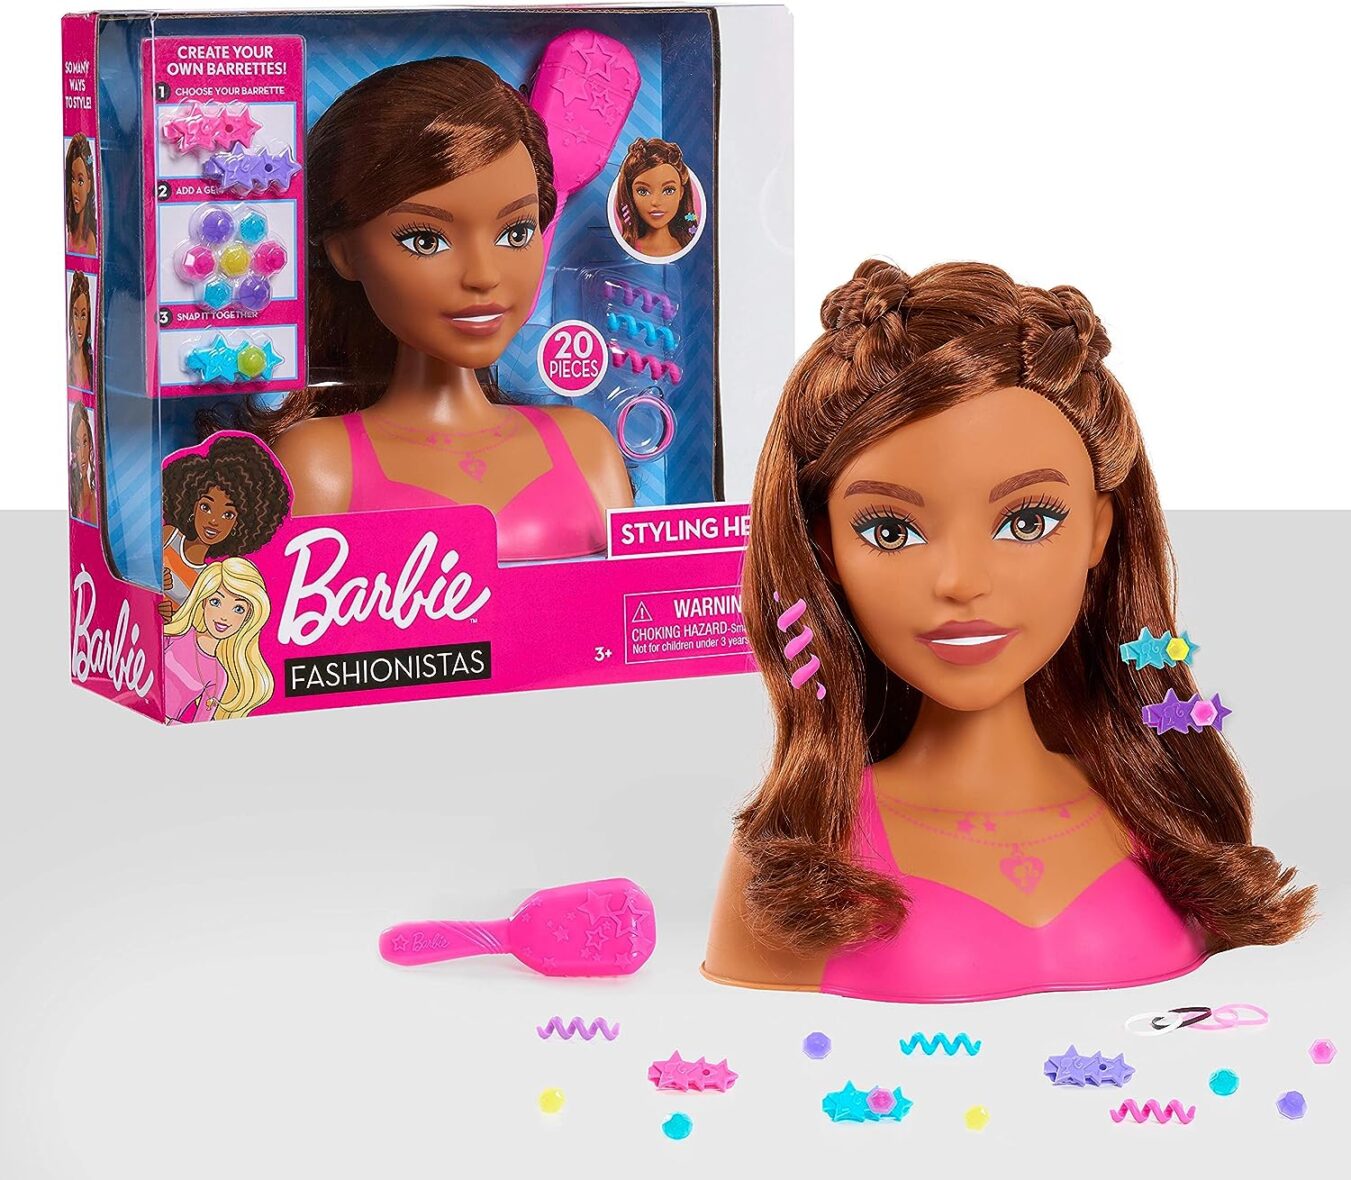 Barbie Fashionistas 8-Inch Styling Head, Brown Hair, 20 Pieces Include Styling Accessories